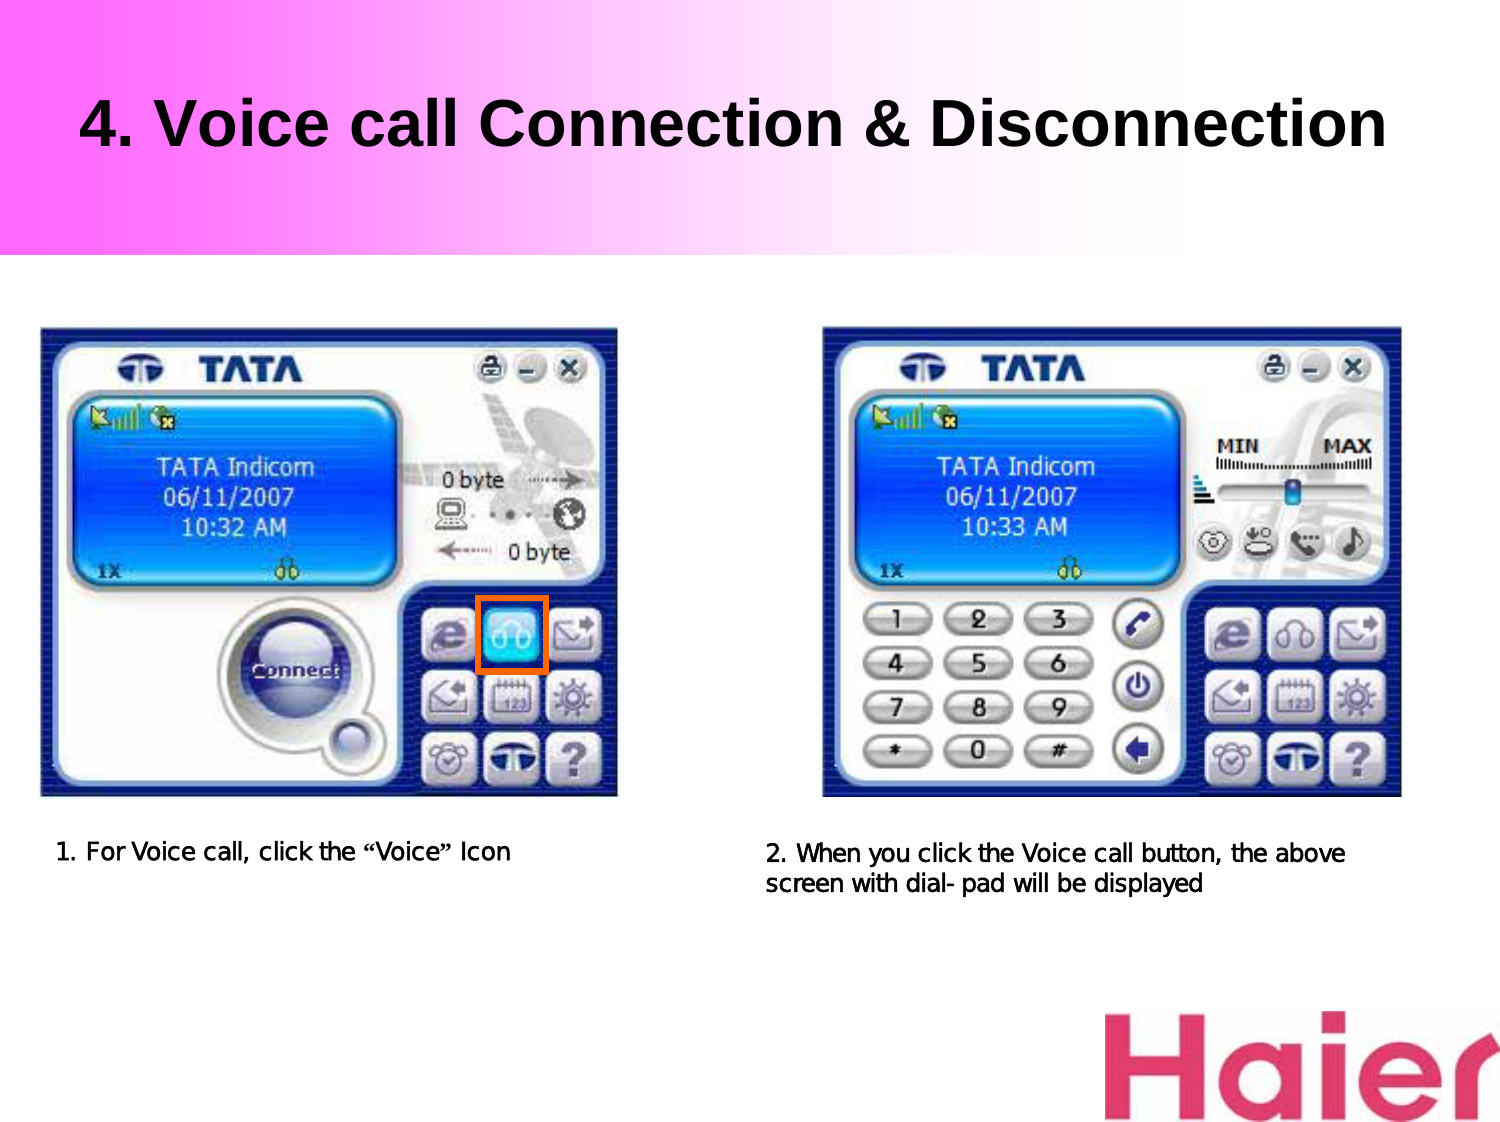 4. Voice call Connection &amp; Disconnection1. For Voice call, click the “Voice”Icon 2. When you click the Voice call button, the above screen with dial-pad will be displayed